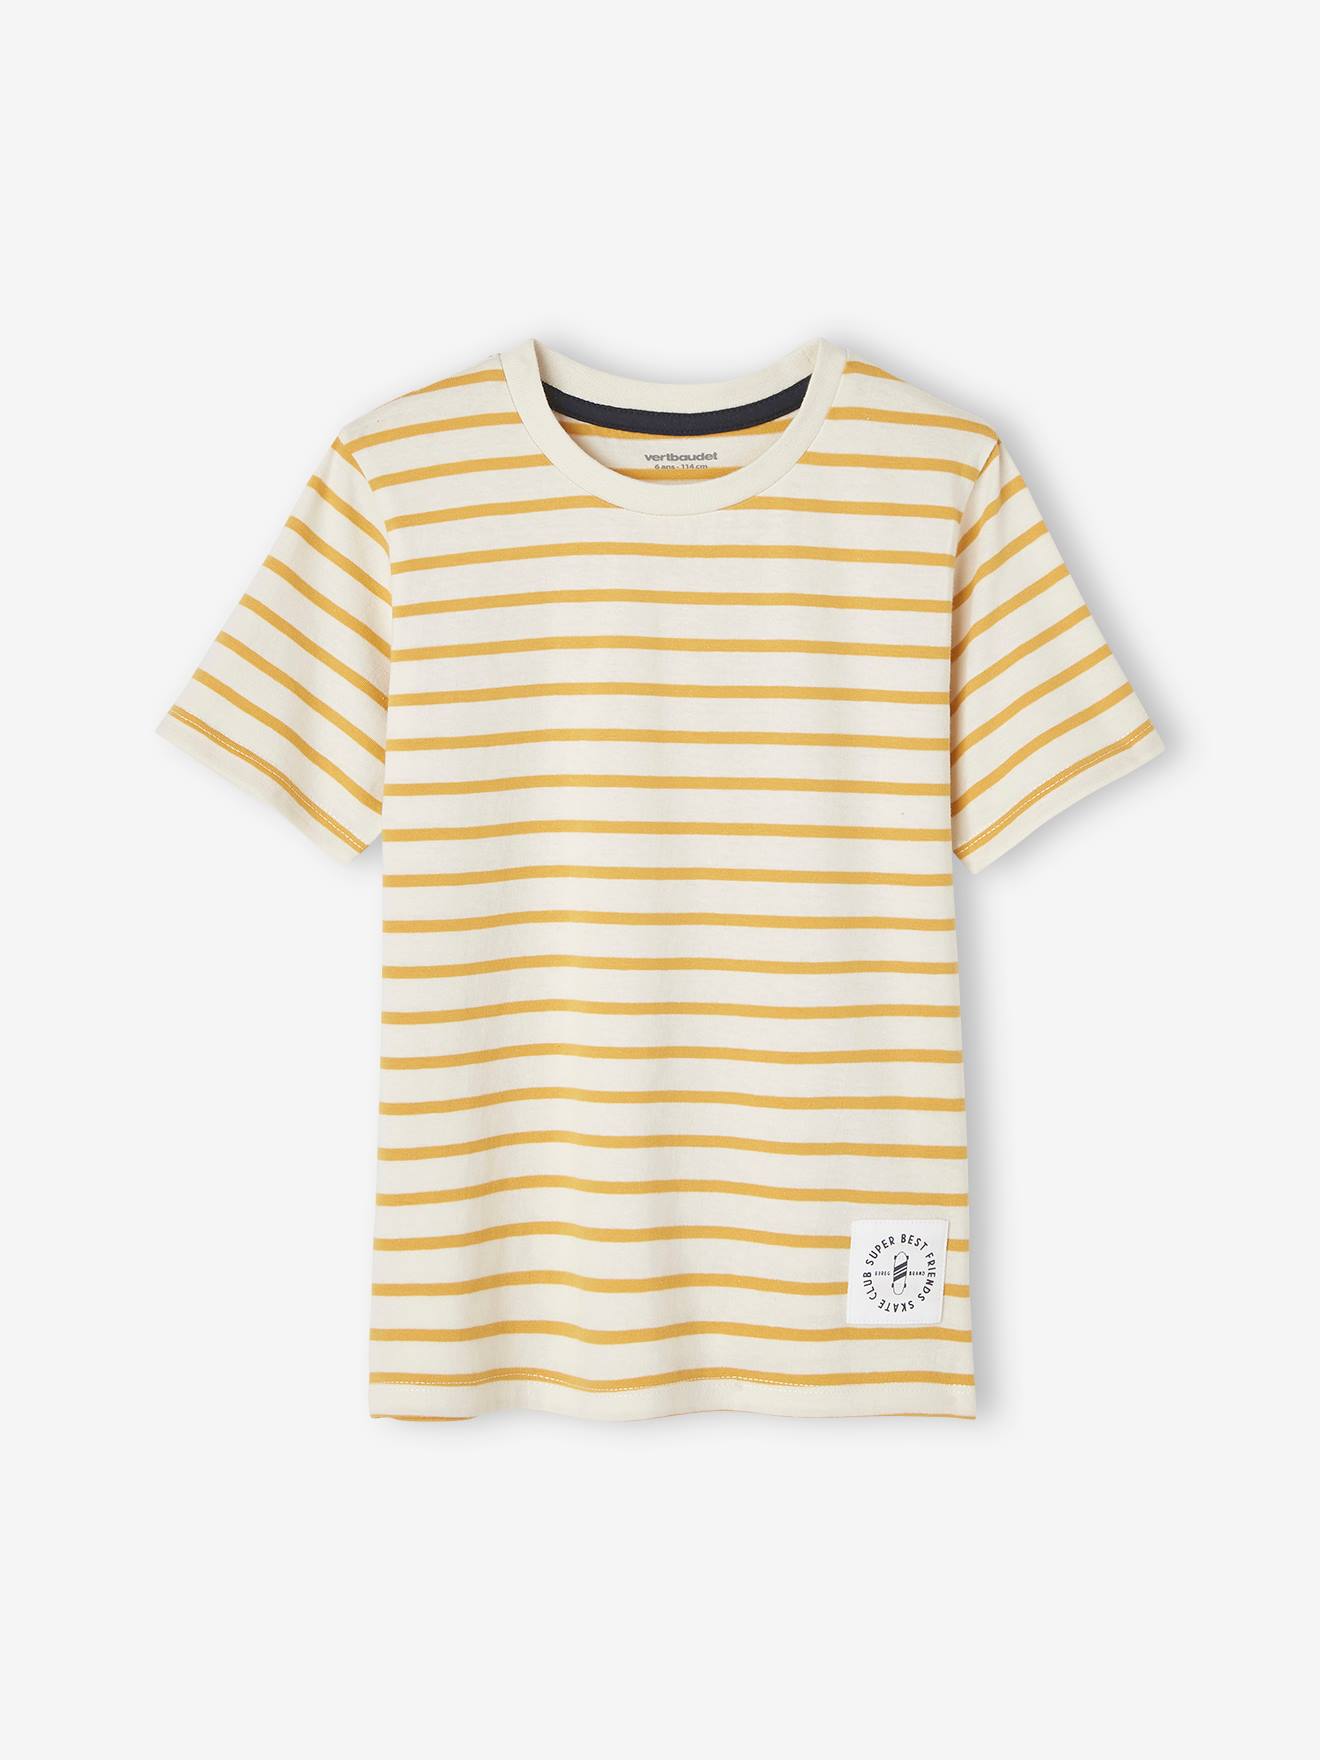 Short-Sleeved Sailor-Style T-Shirt for Boys striped yellow